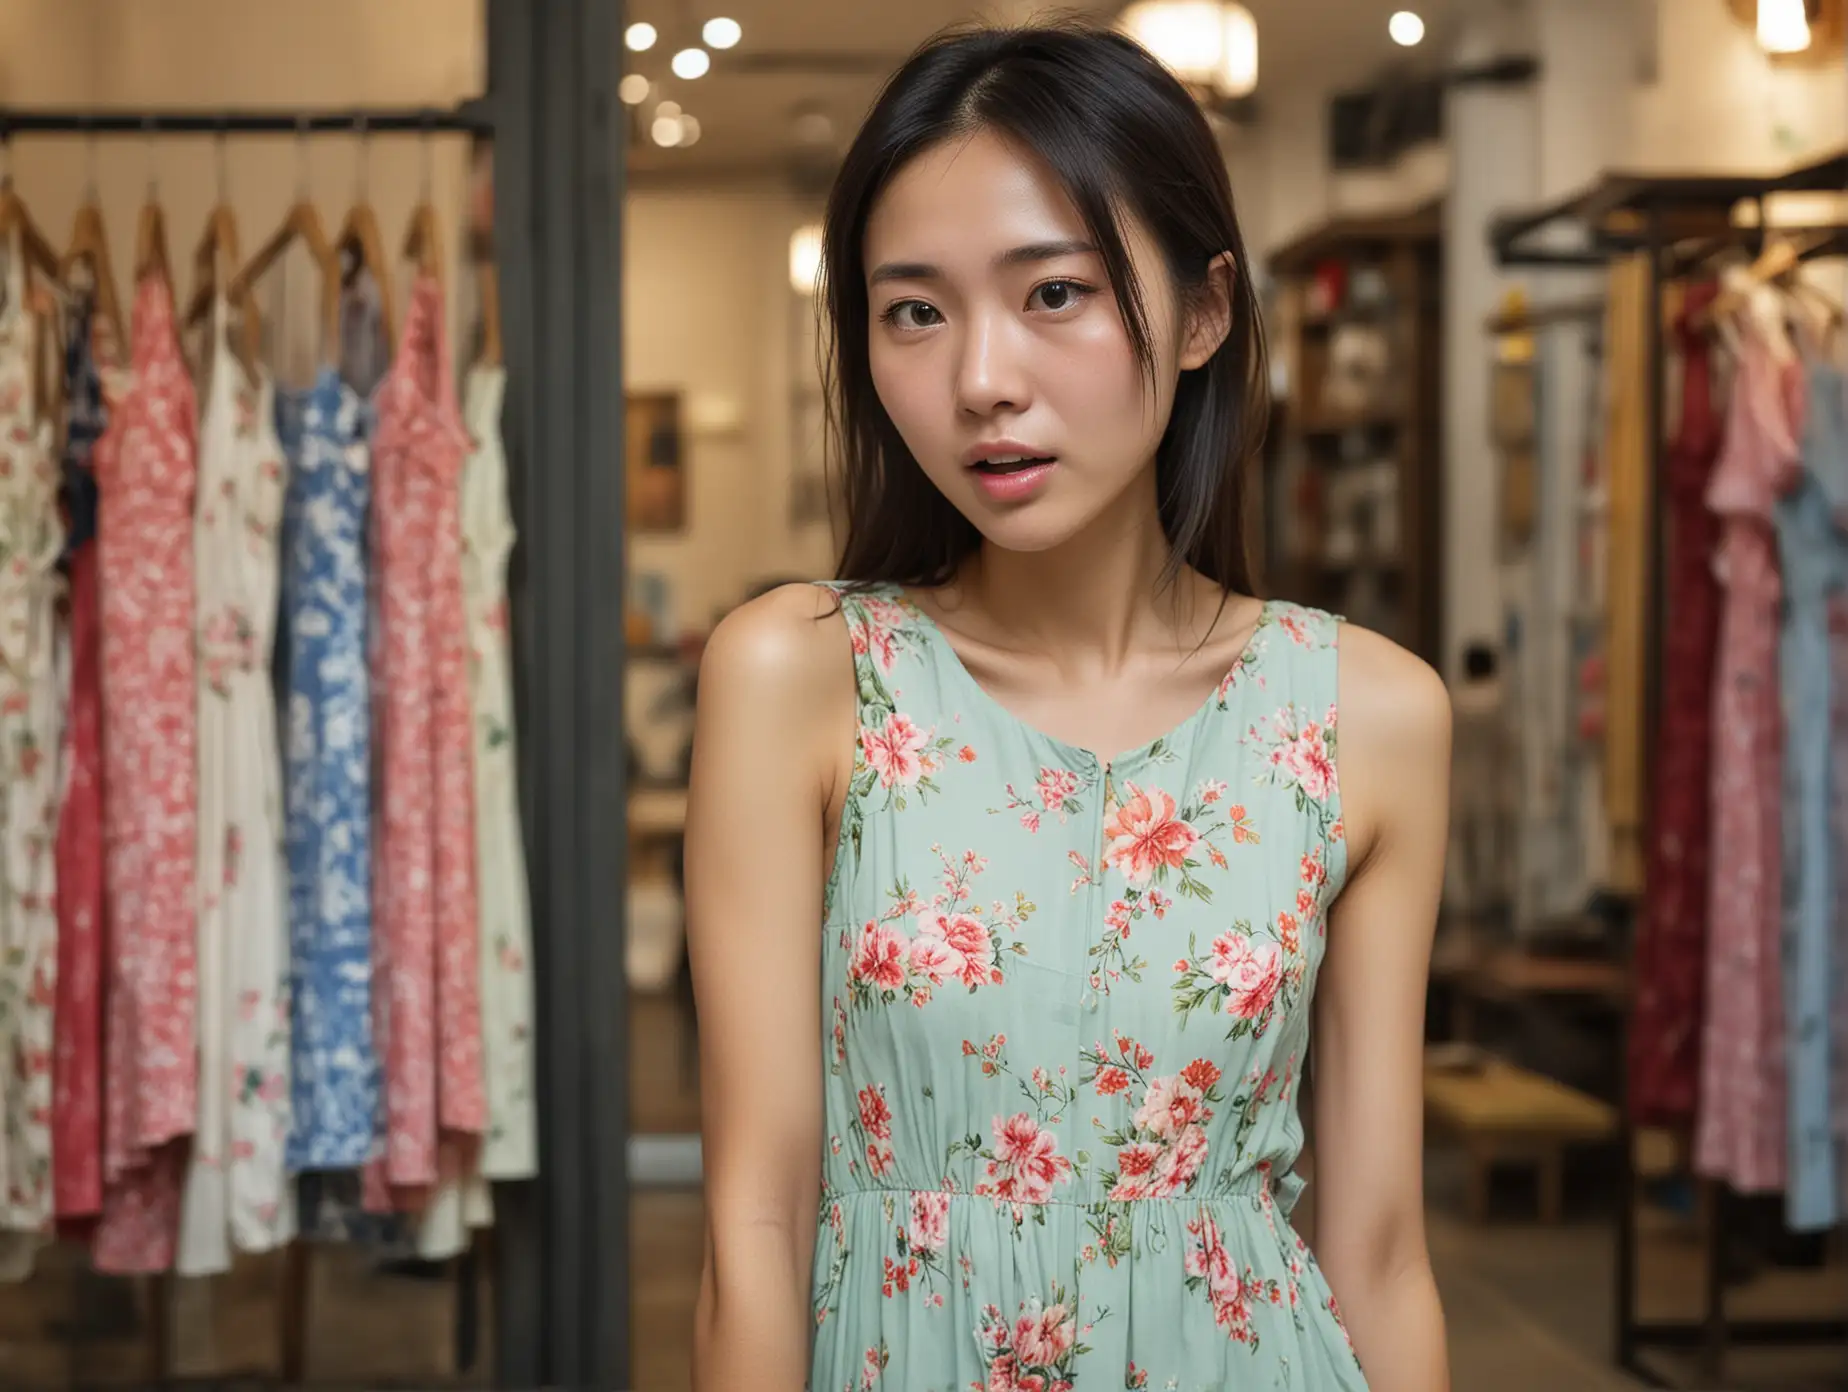 Face of a beautiful naturally skinny sweet Chinese young woman wearing a summer dress in a boutique in Shanghai, blushing intensely, gasping, and staring up at the camera with a desperate pleading look